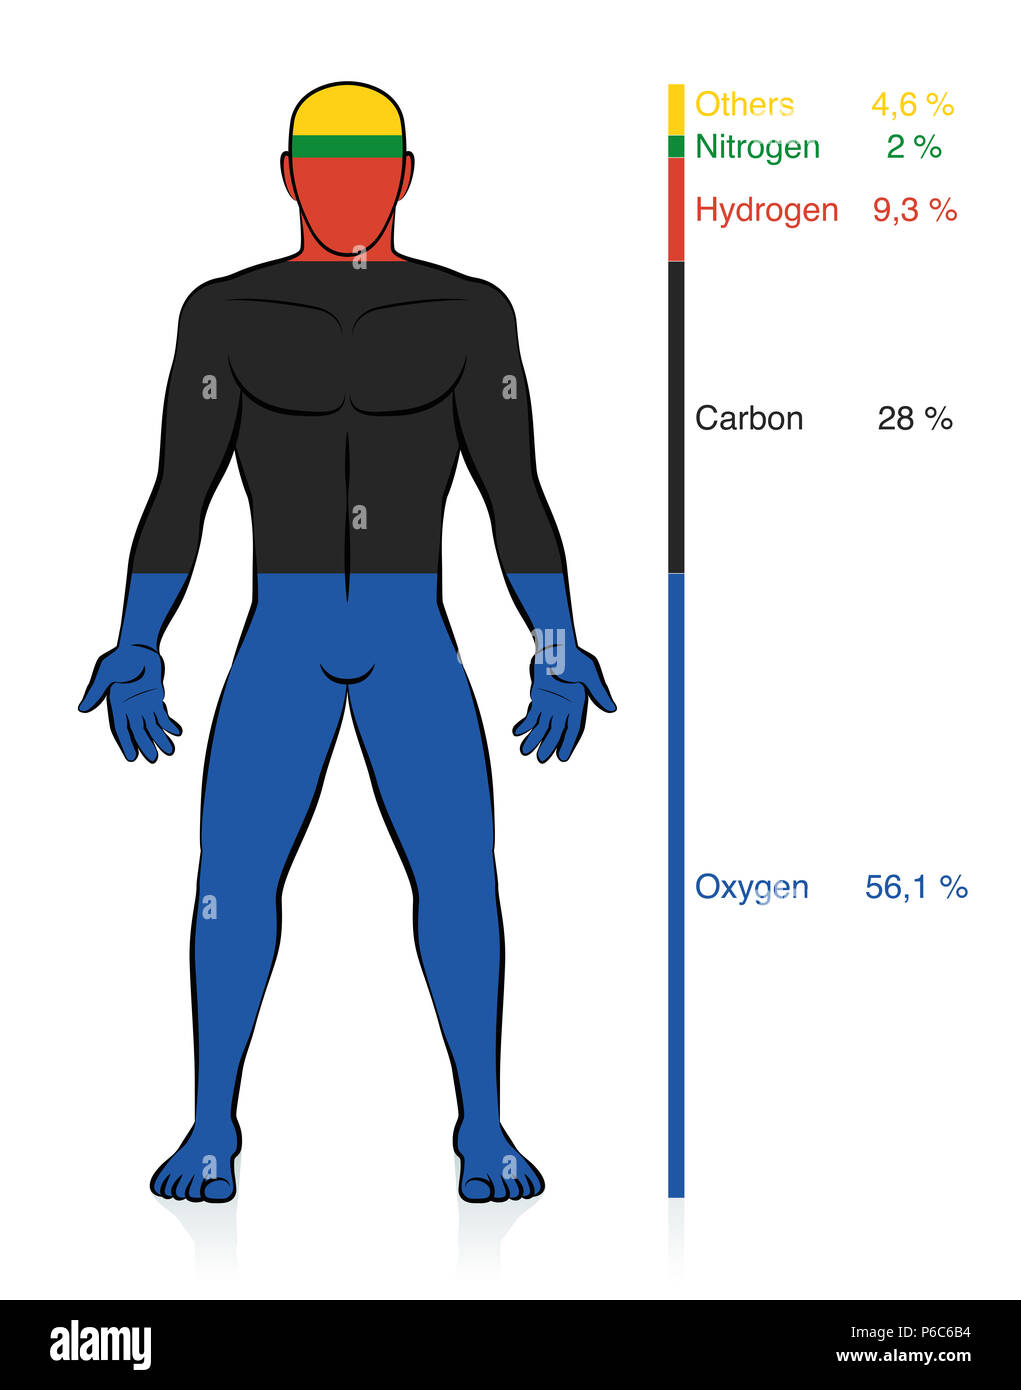 Chemical composition of the human body. Oxygen, carbon, hydrogen, and nitrogen, the basic organic chemical elements plus percent of mass information. Stock Photo